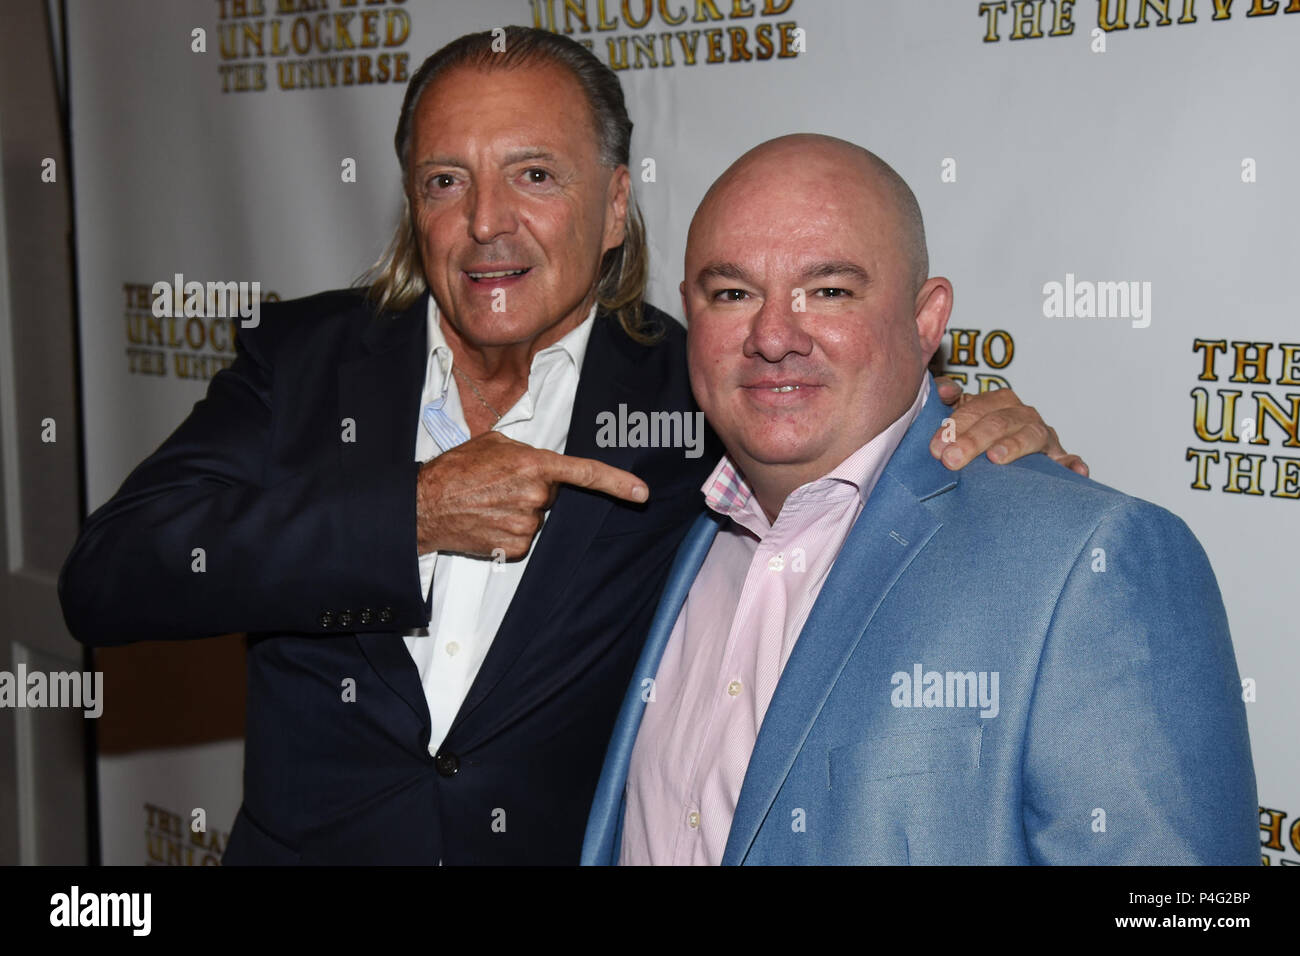 West Hollywood, USA. 21st June, 2018. Armand Assante and Bakhodir Yuldashev attends the Premiere of 'The Man Who Unlocked The Universe' at The London West Hollywood on June 21, 2018 in West Hollywood, California. Credit: The Photo Access/Alamy Live News Stock Photo